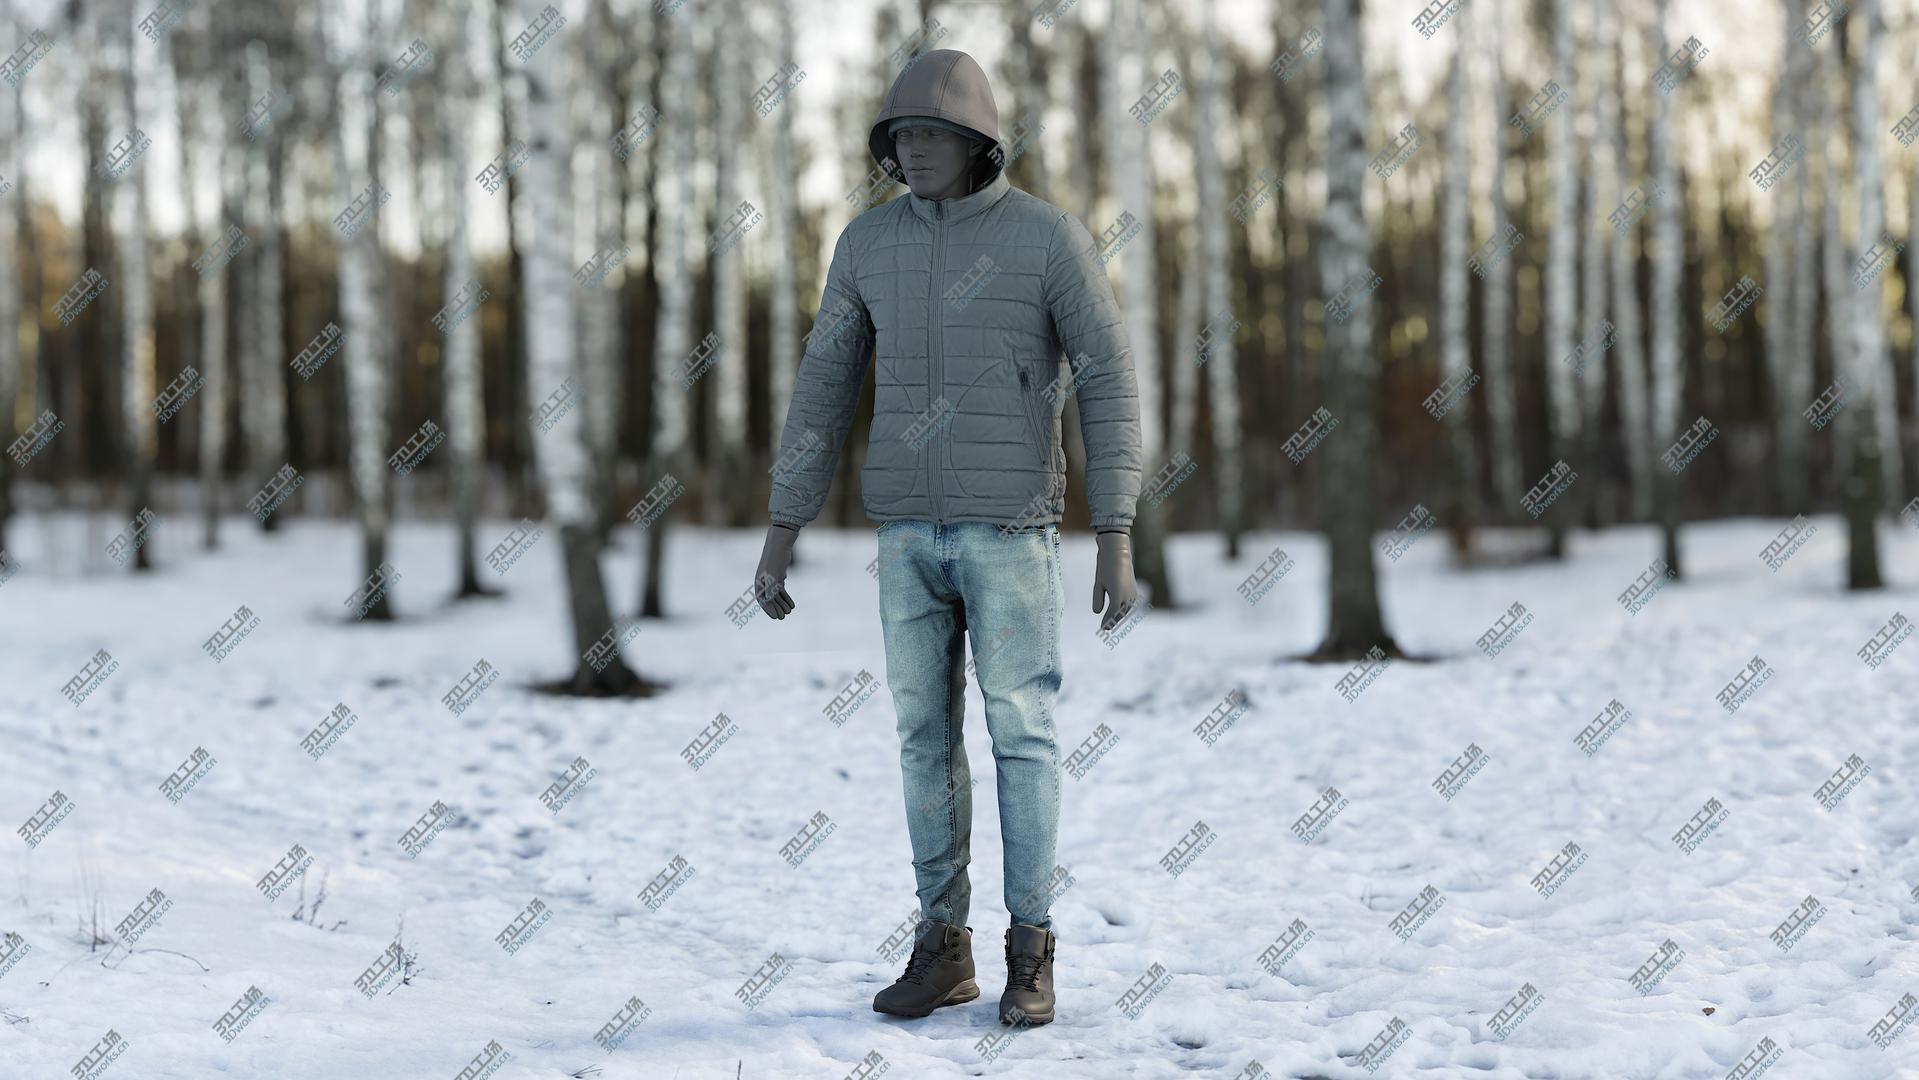 images/goods_img/20210313/3D Men's Down Jacket with Jeans, Jacket, Hat and Boots/2.jpg